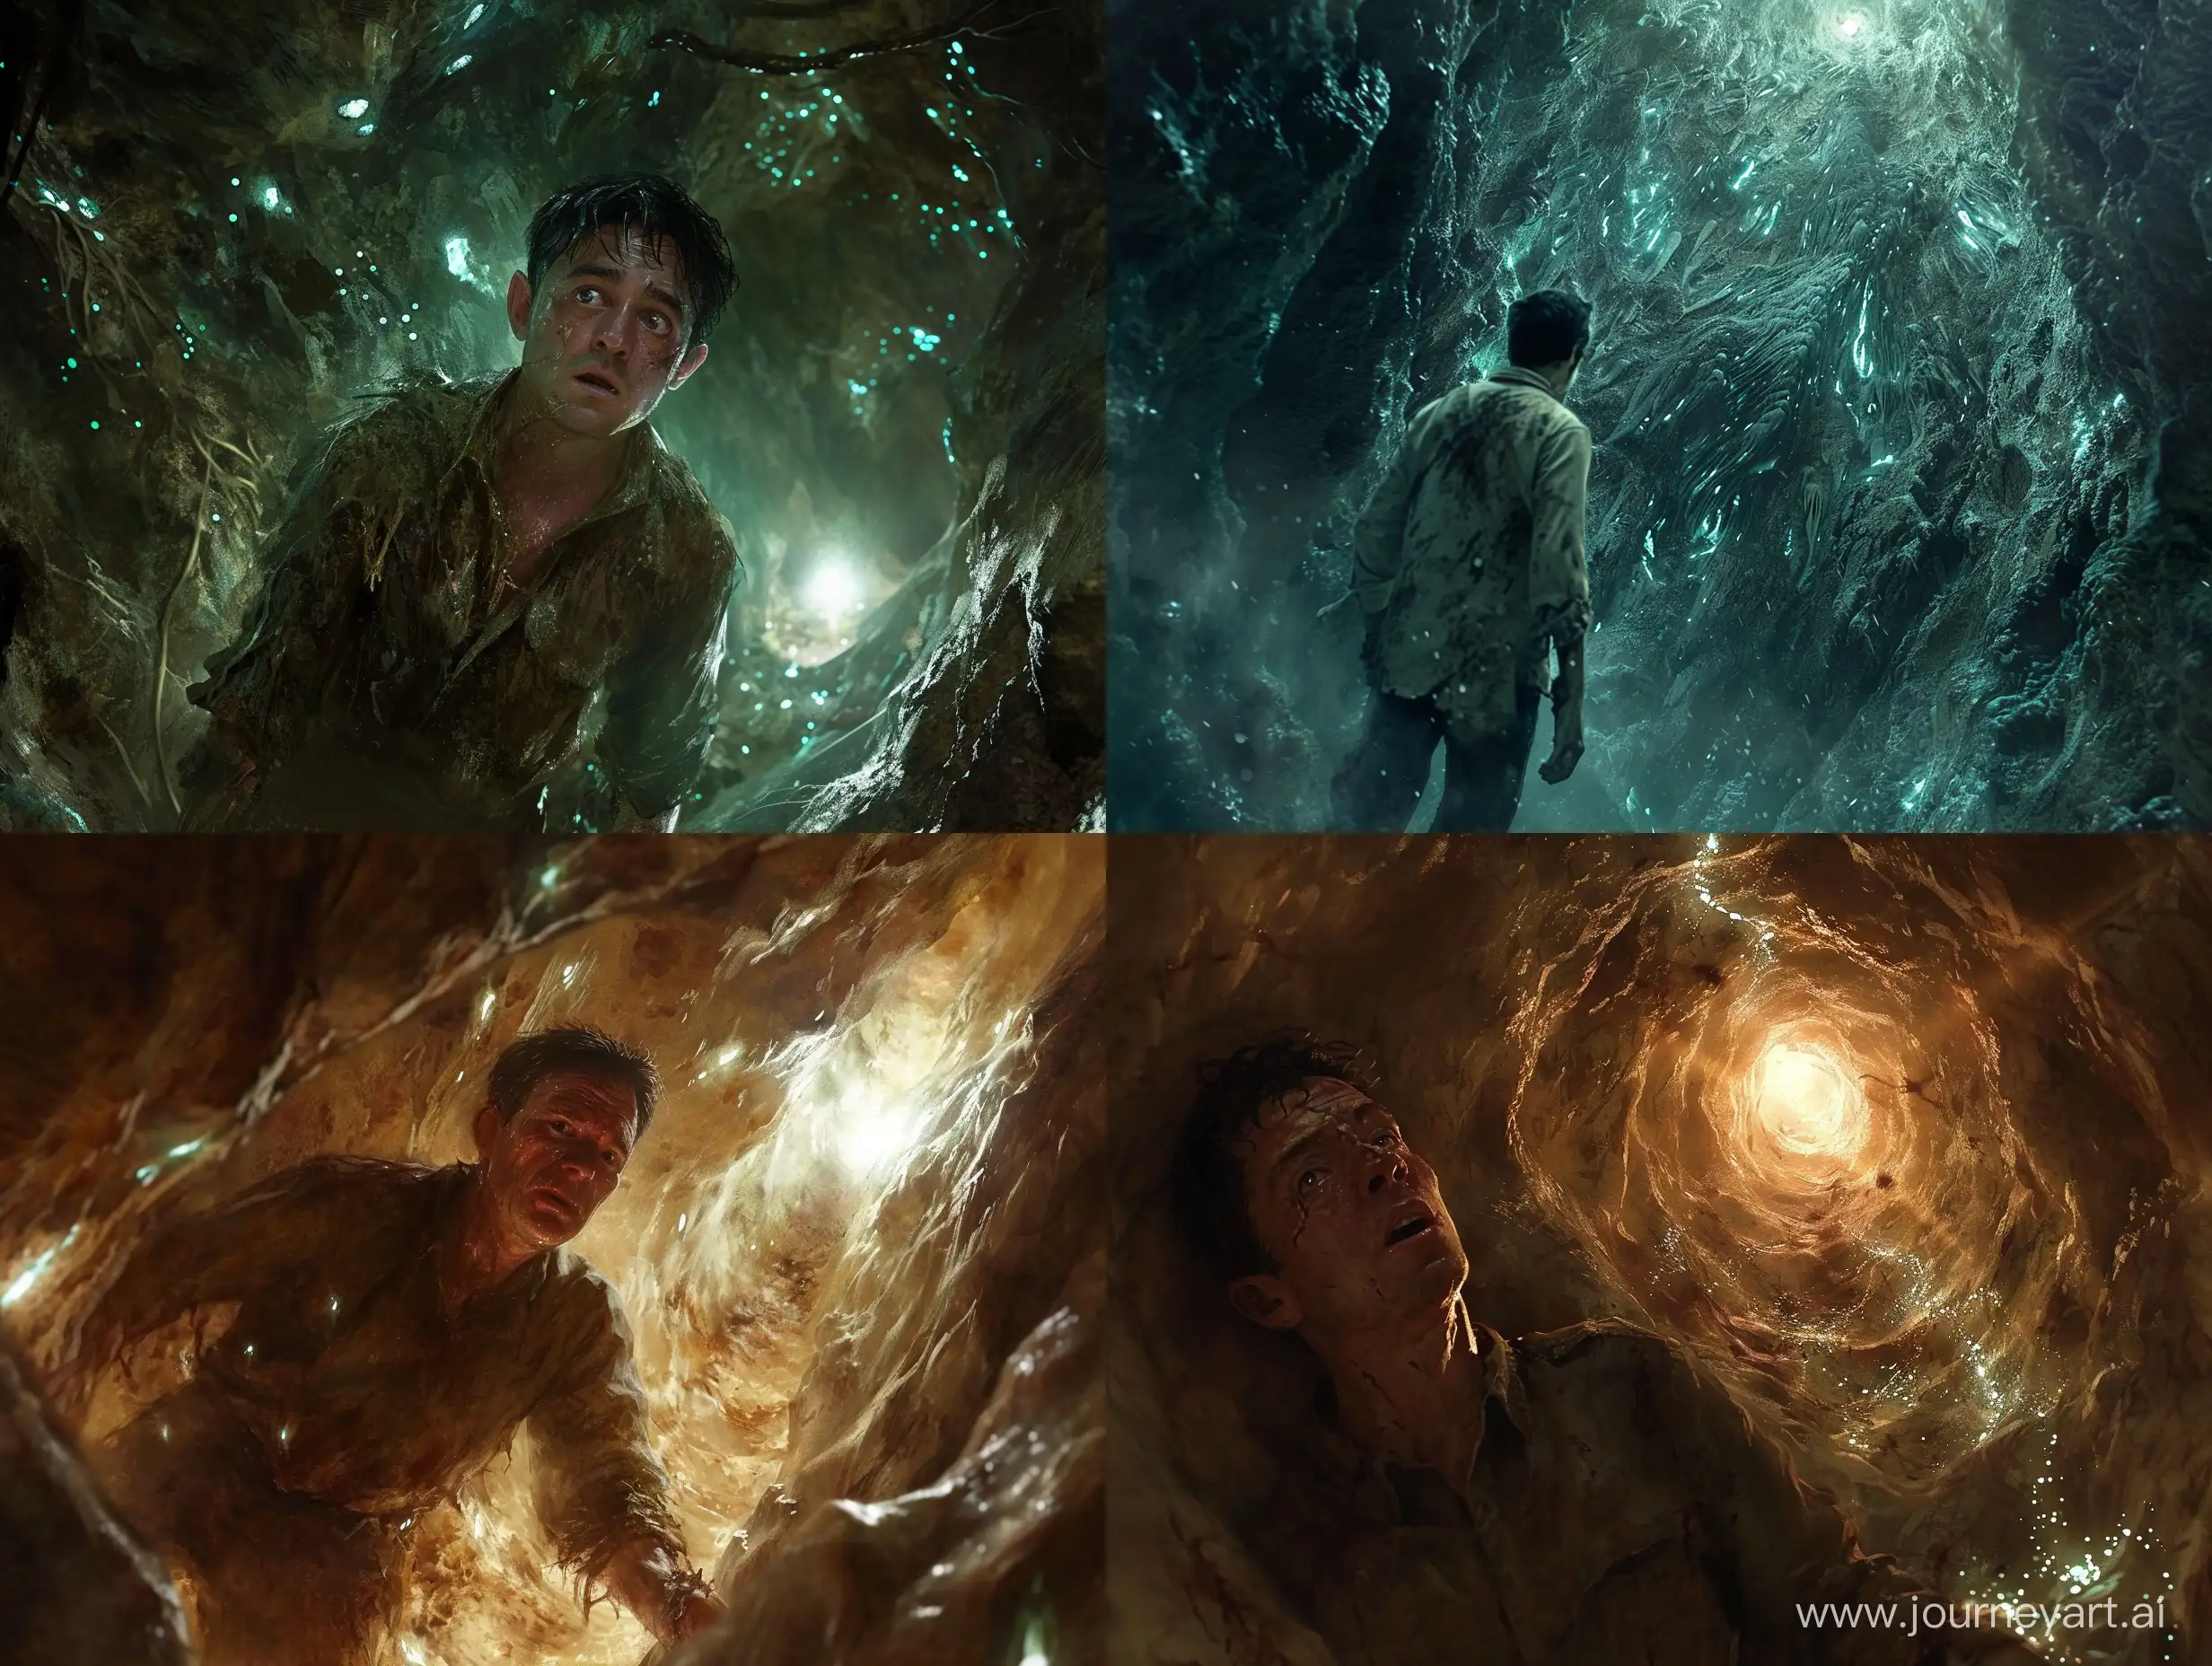 A harrowing scene of a man lost in a labyrinthine network of caves, his features etched with fear and desperation. The dimly lit passages stretch out in all directions, creating a disorienting sense of confinement and isolation. The walls are adorned with an eerie bioluminescent fungi, casting a sinister glow that only serves to heighten the man's sense of dread. His clothes are tattered and covered in dirt, a testament to his arduous journey through the caves. In the distance, a flickering light beckons, perhaps offering a glimmer of hope or a trap set by the unseen horrors that lurk within the shadows. The man's gaze darts nervously from side to side, his every muscle taut with anticipation, as he struggles to navigate the treacherous terrain. The image is eerily reminiscent of the world of The Callisto Protocol on PlayStation 5, where death and horror lurk around every corner, and the only hope for survival is to remain vigilant and find a way out of the endless caves.